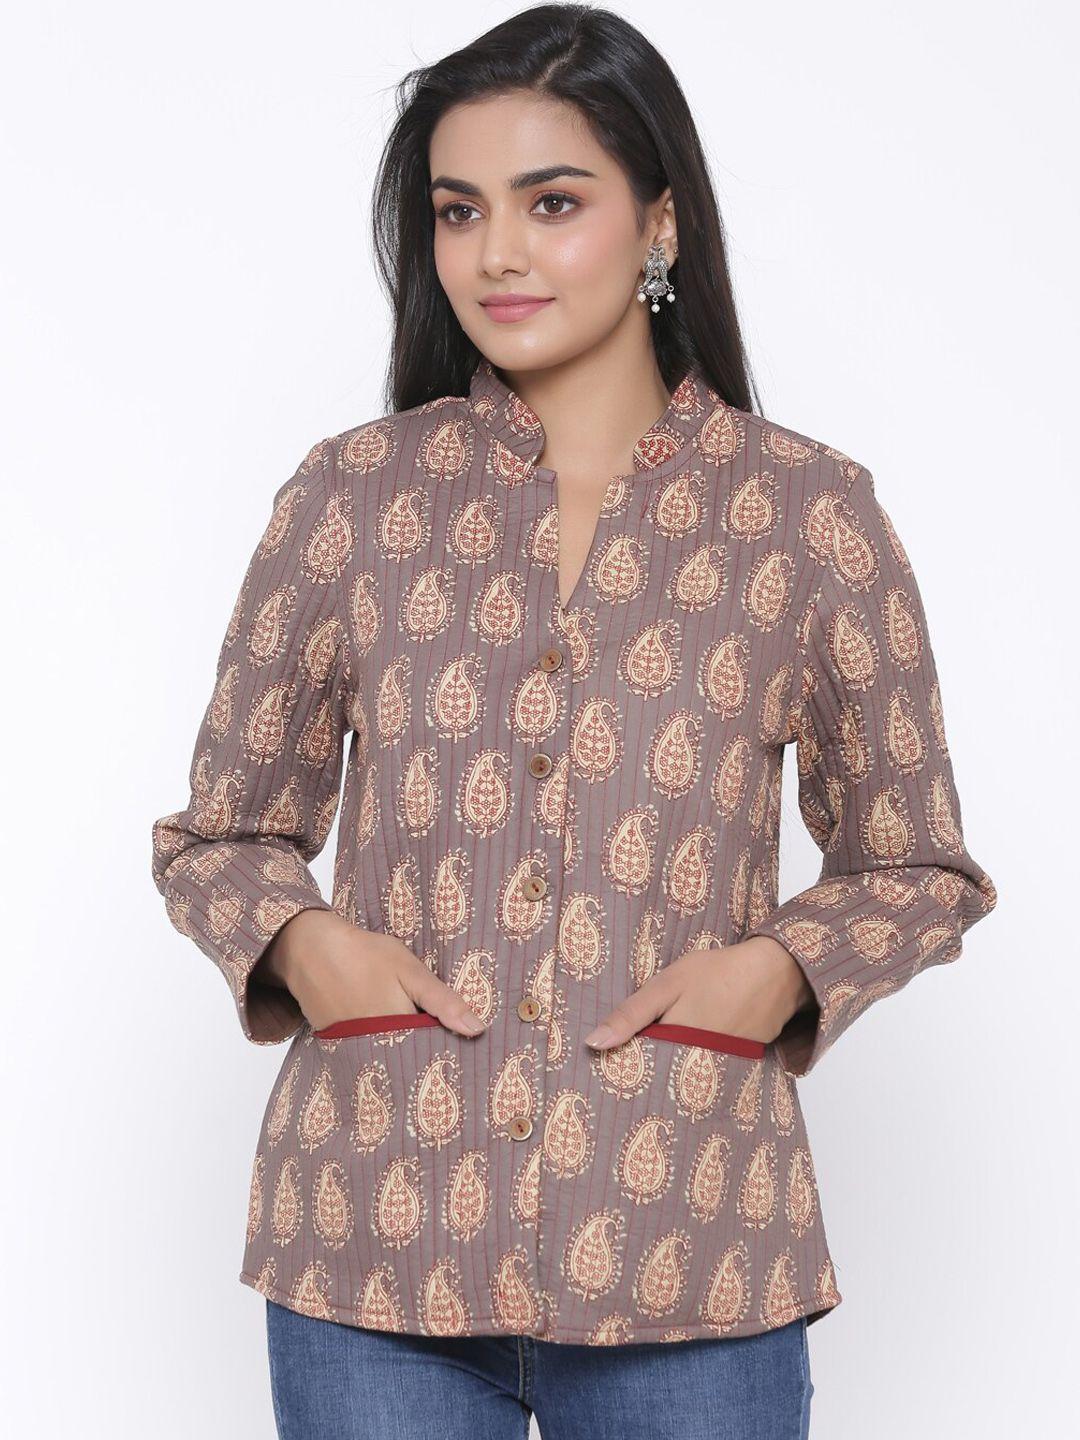 fabglobal women brown printed open front jacket